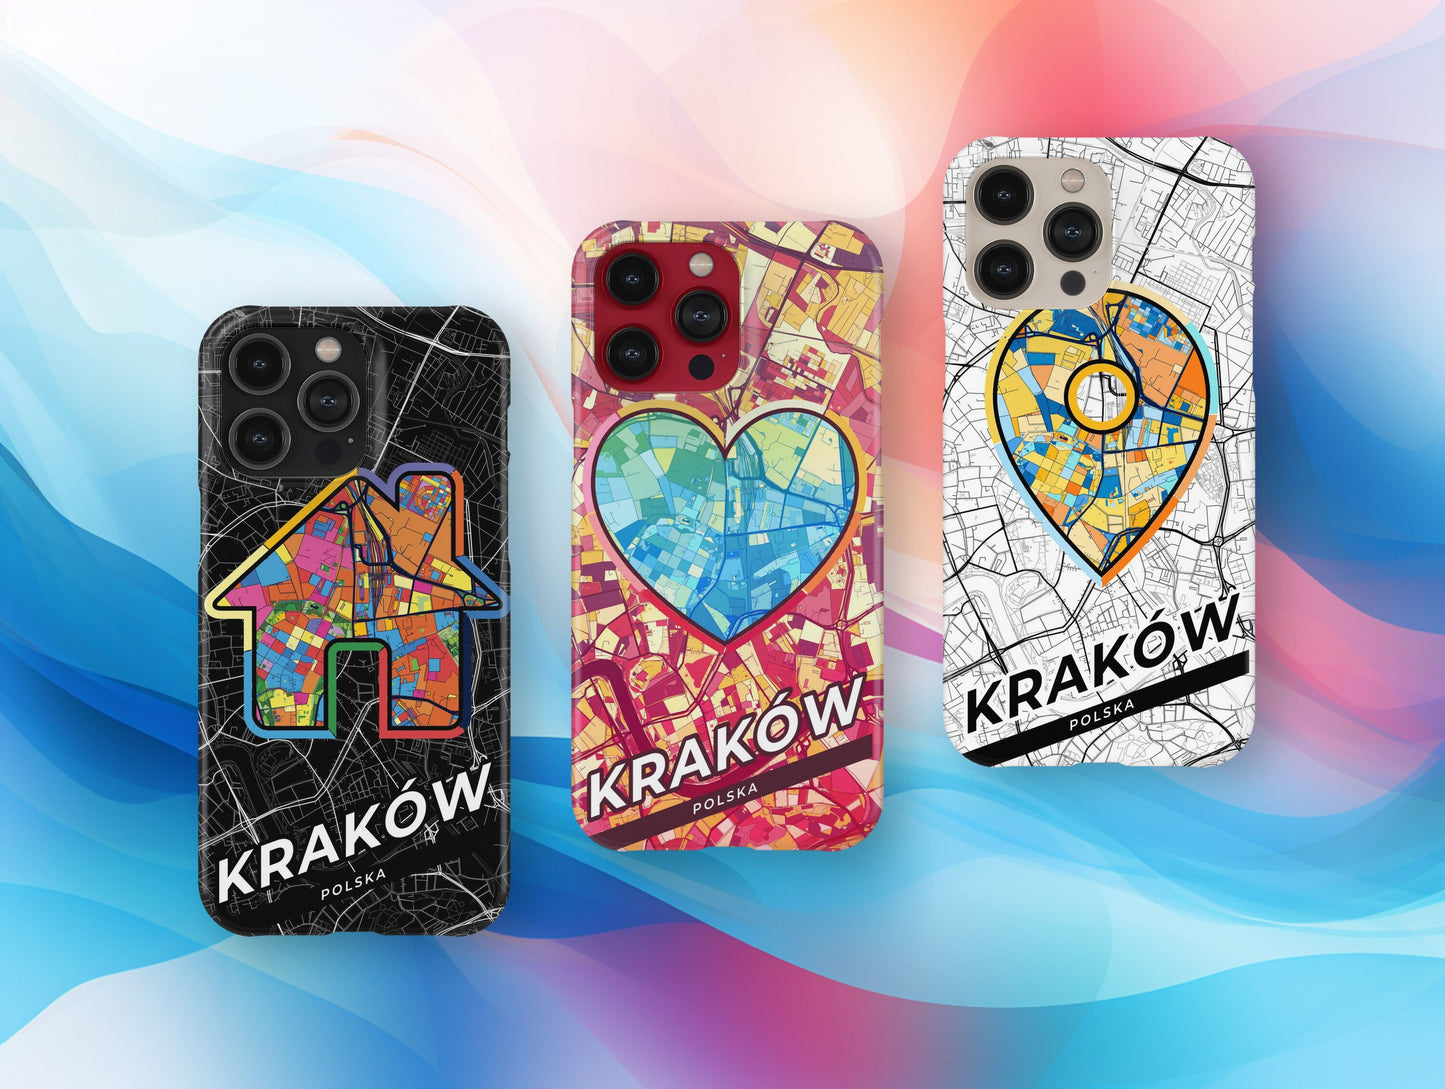 Kraków Poland slim phone case with colorful icon. Birthday, wedding or housewarming gift. Couple match cases.